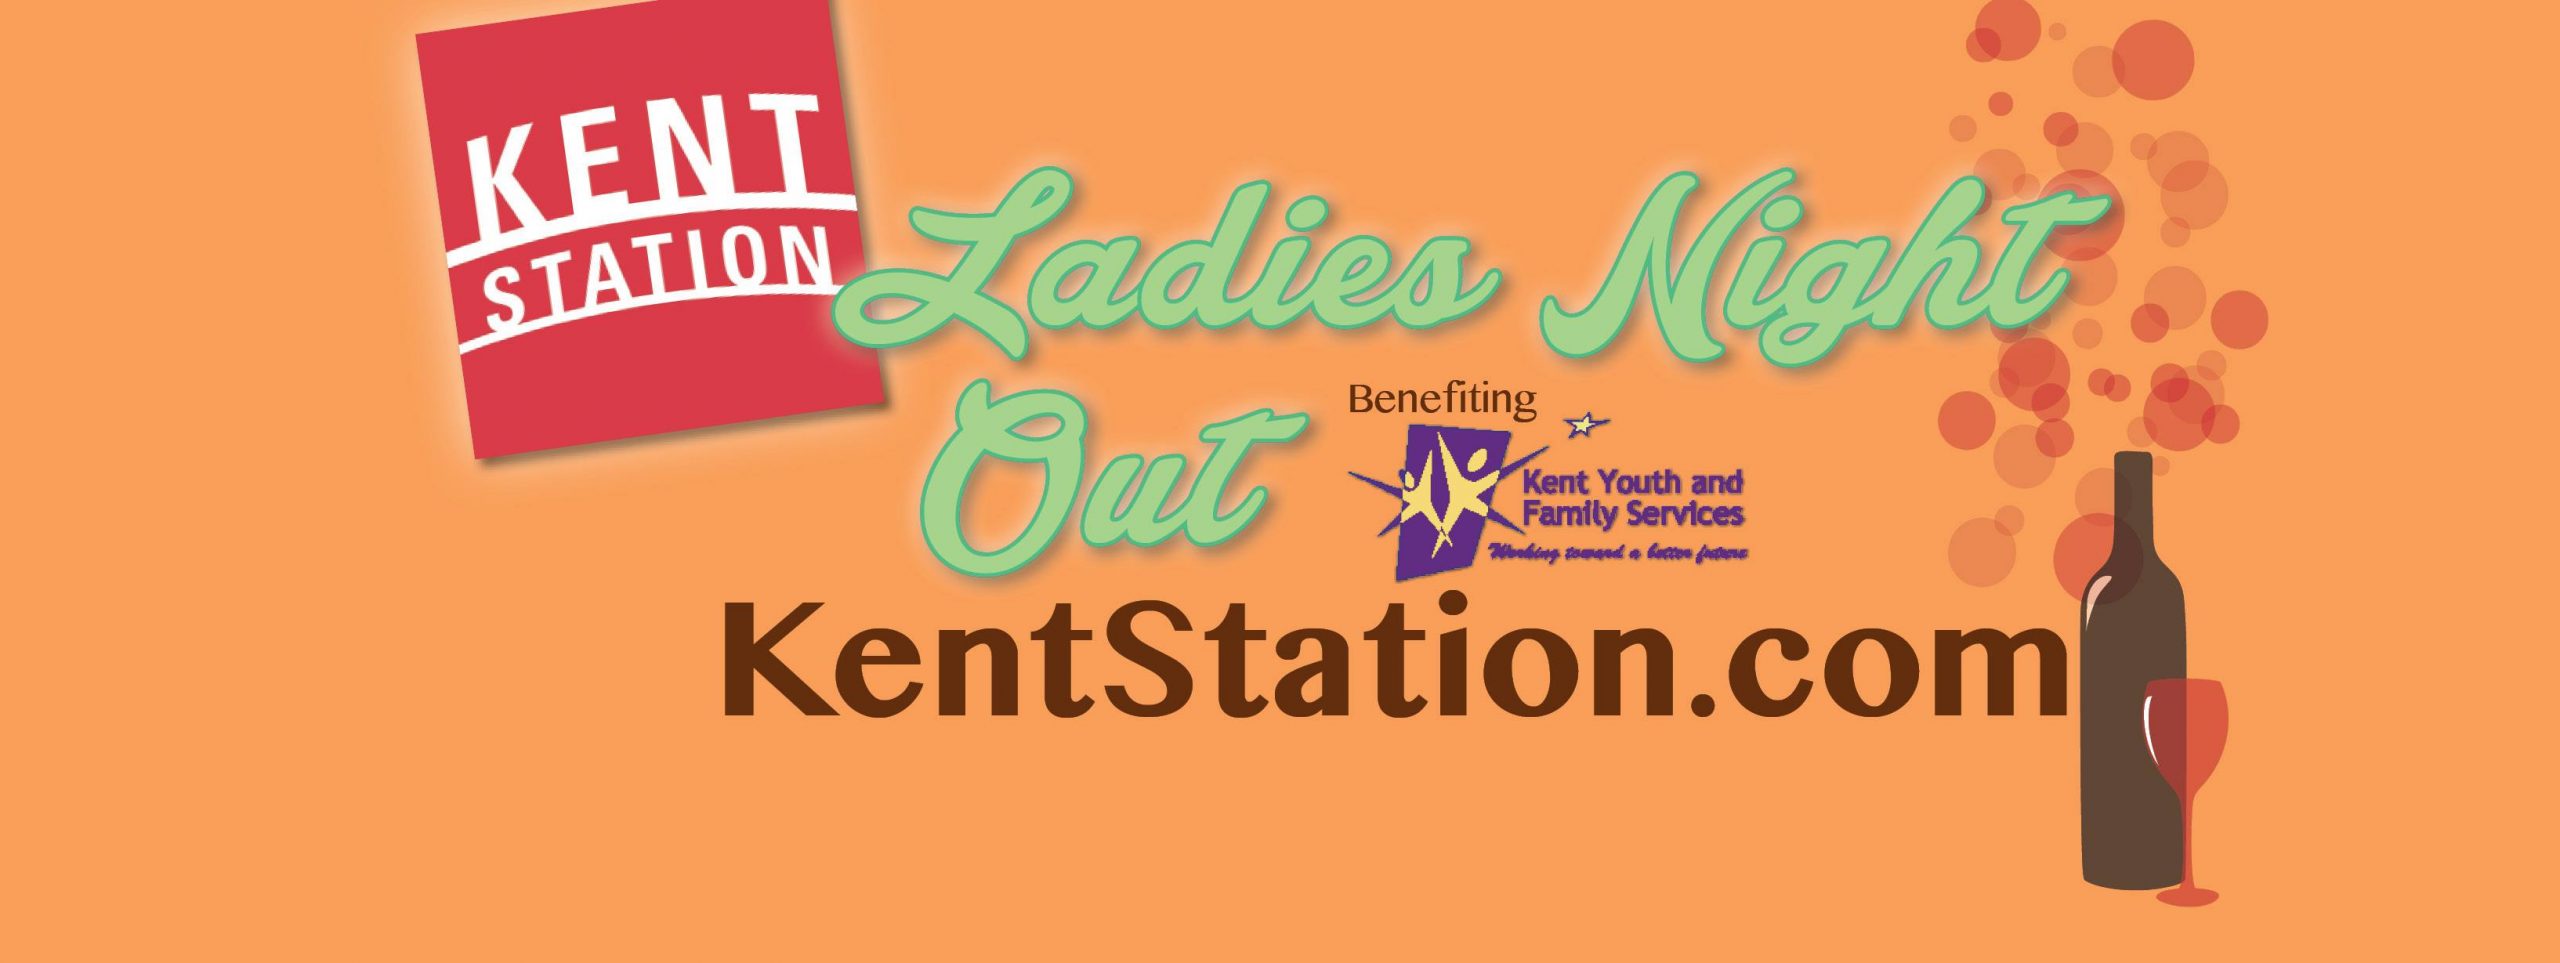 Ladies Night Out - Kent Youth & Family Services